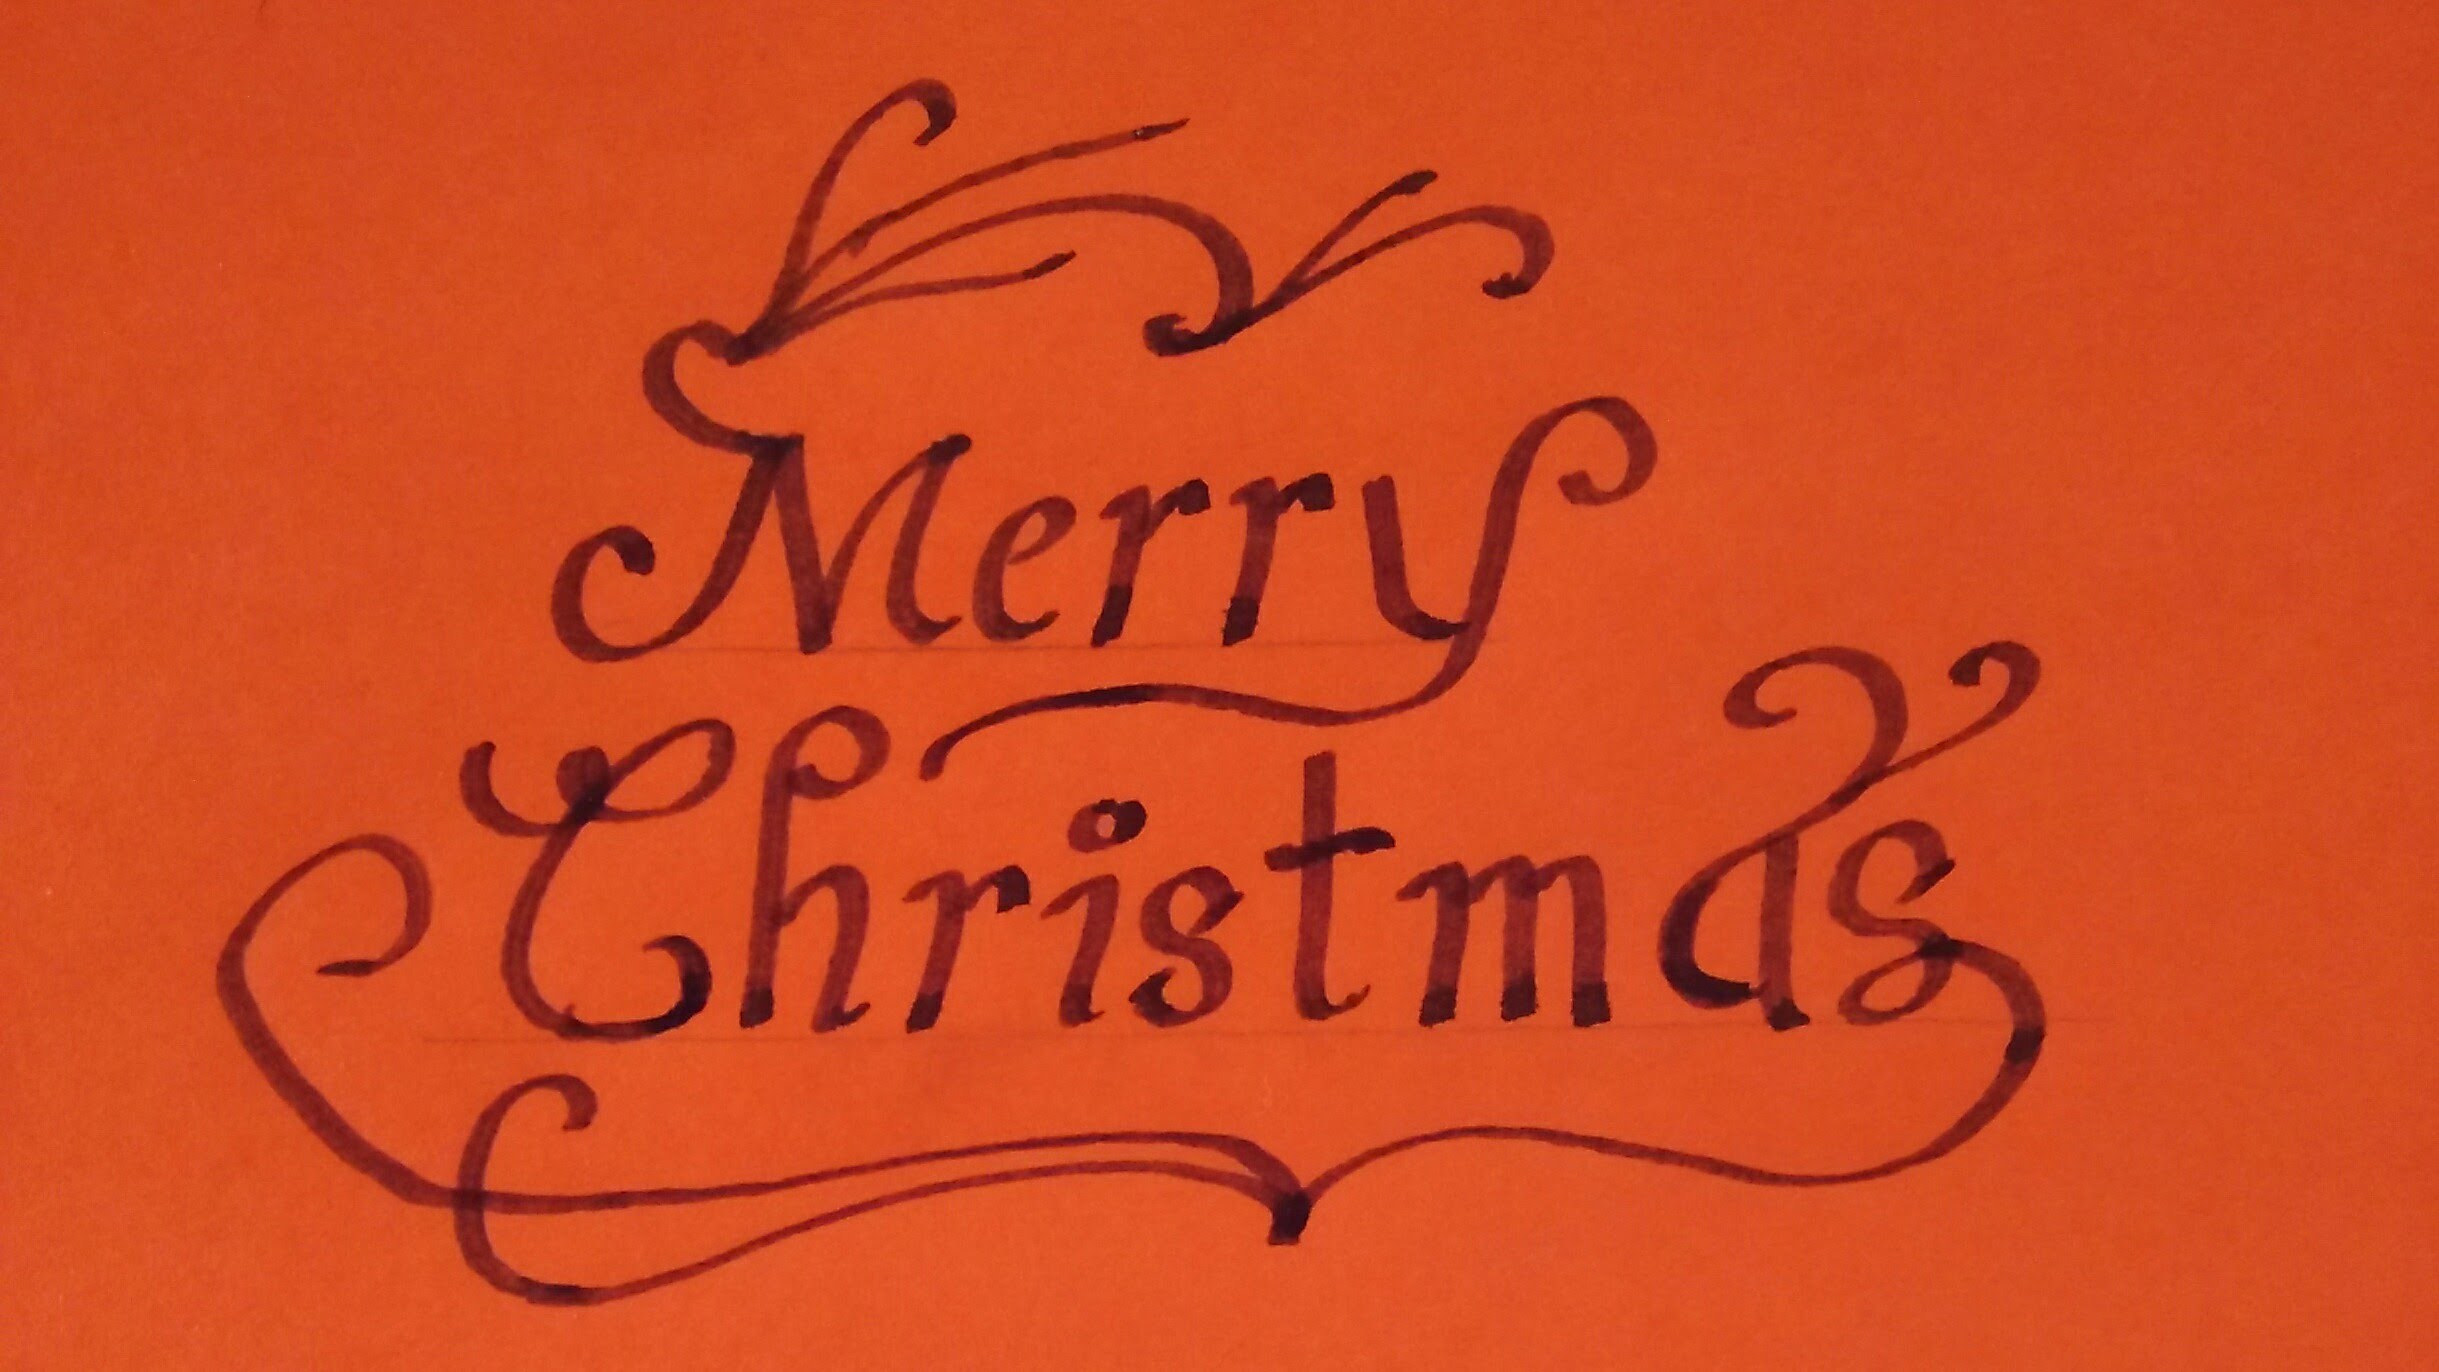 How to write Merry Christmas in calligraphy